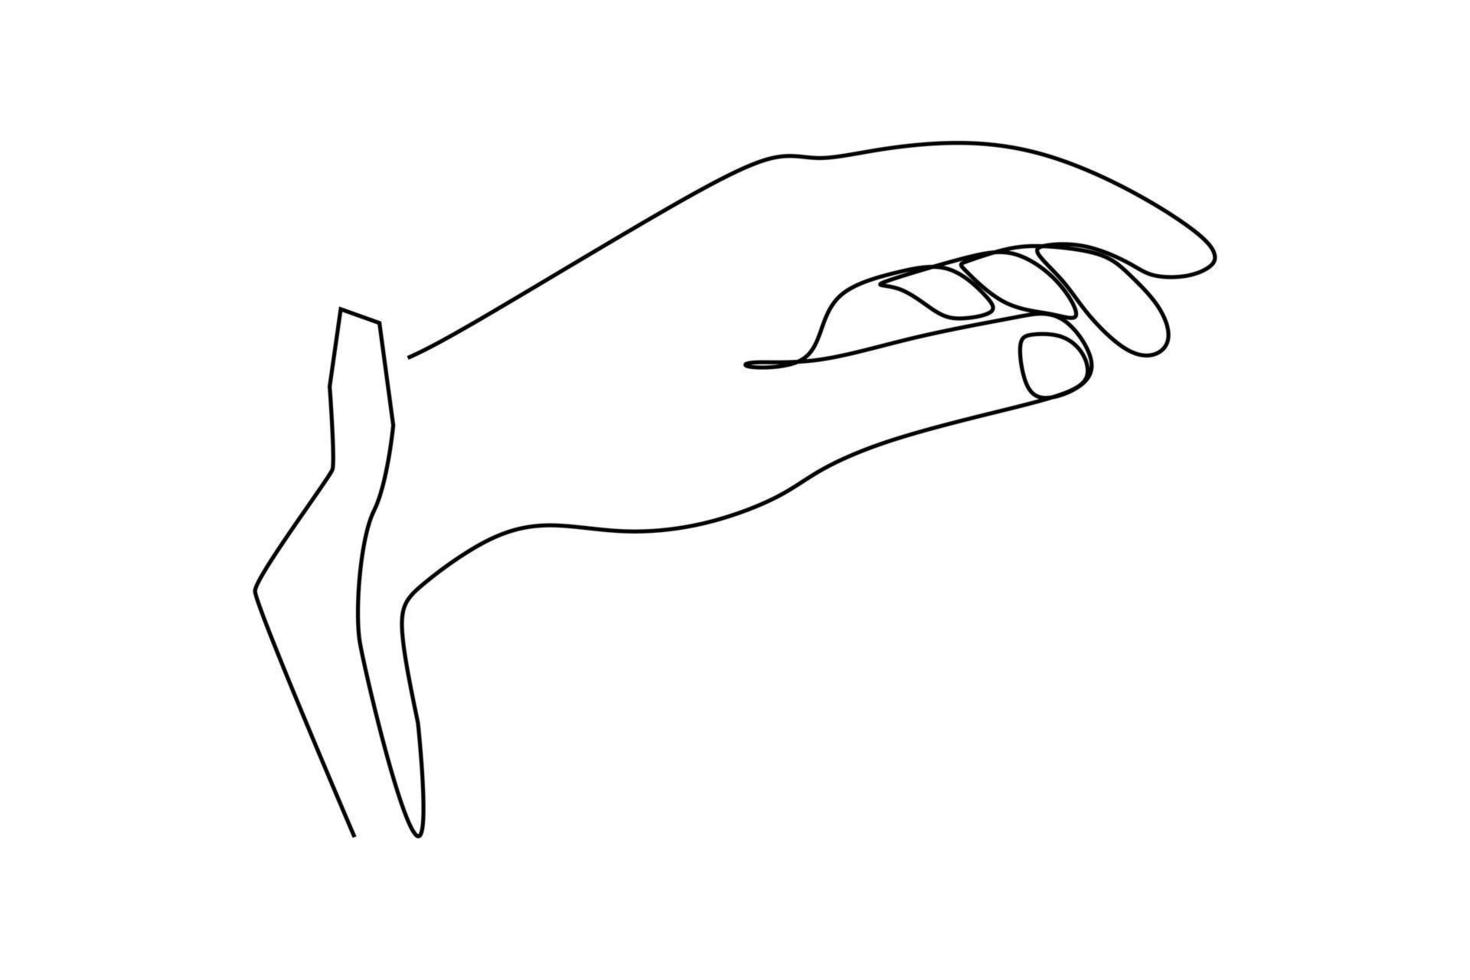 Wrist Palm gesture. Different position of the fingers. Sign and symbol of hand gestures. Single continuous drawing line. Hand drawn style art doodle isolated on white background vector